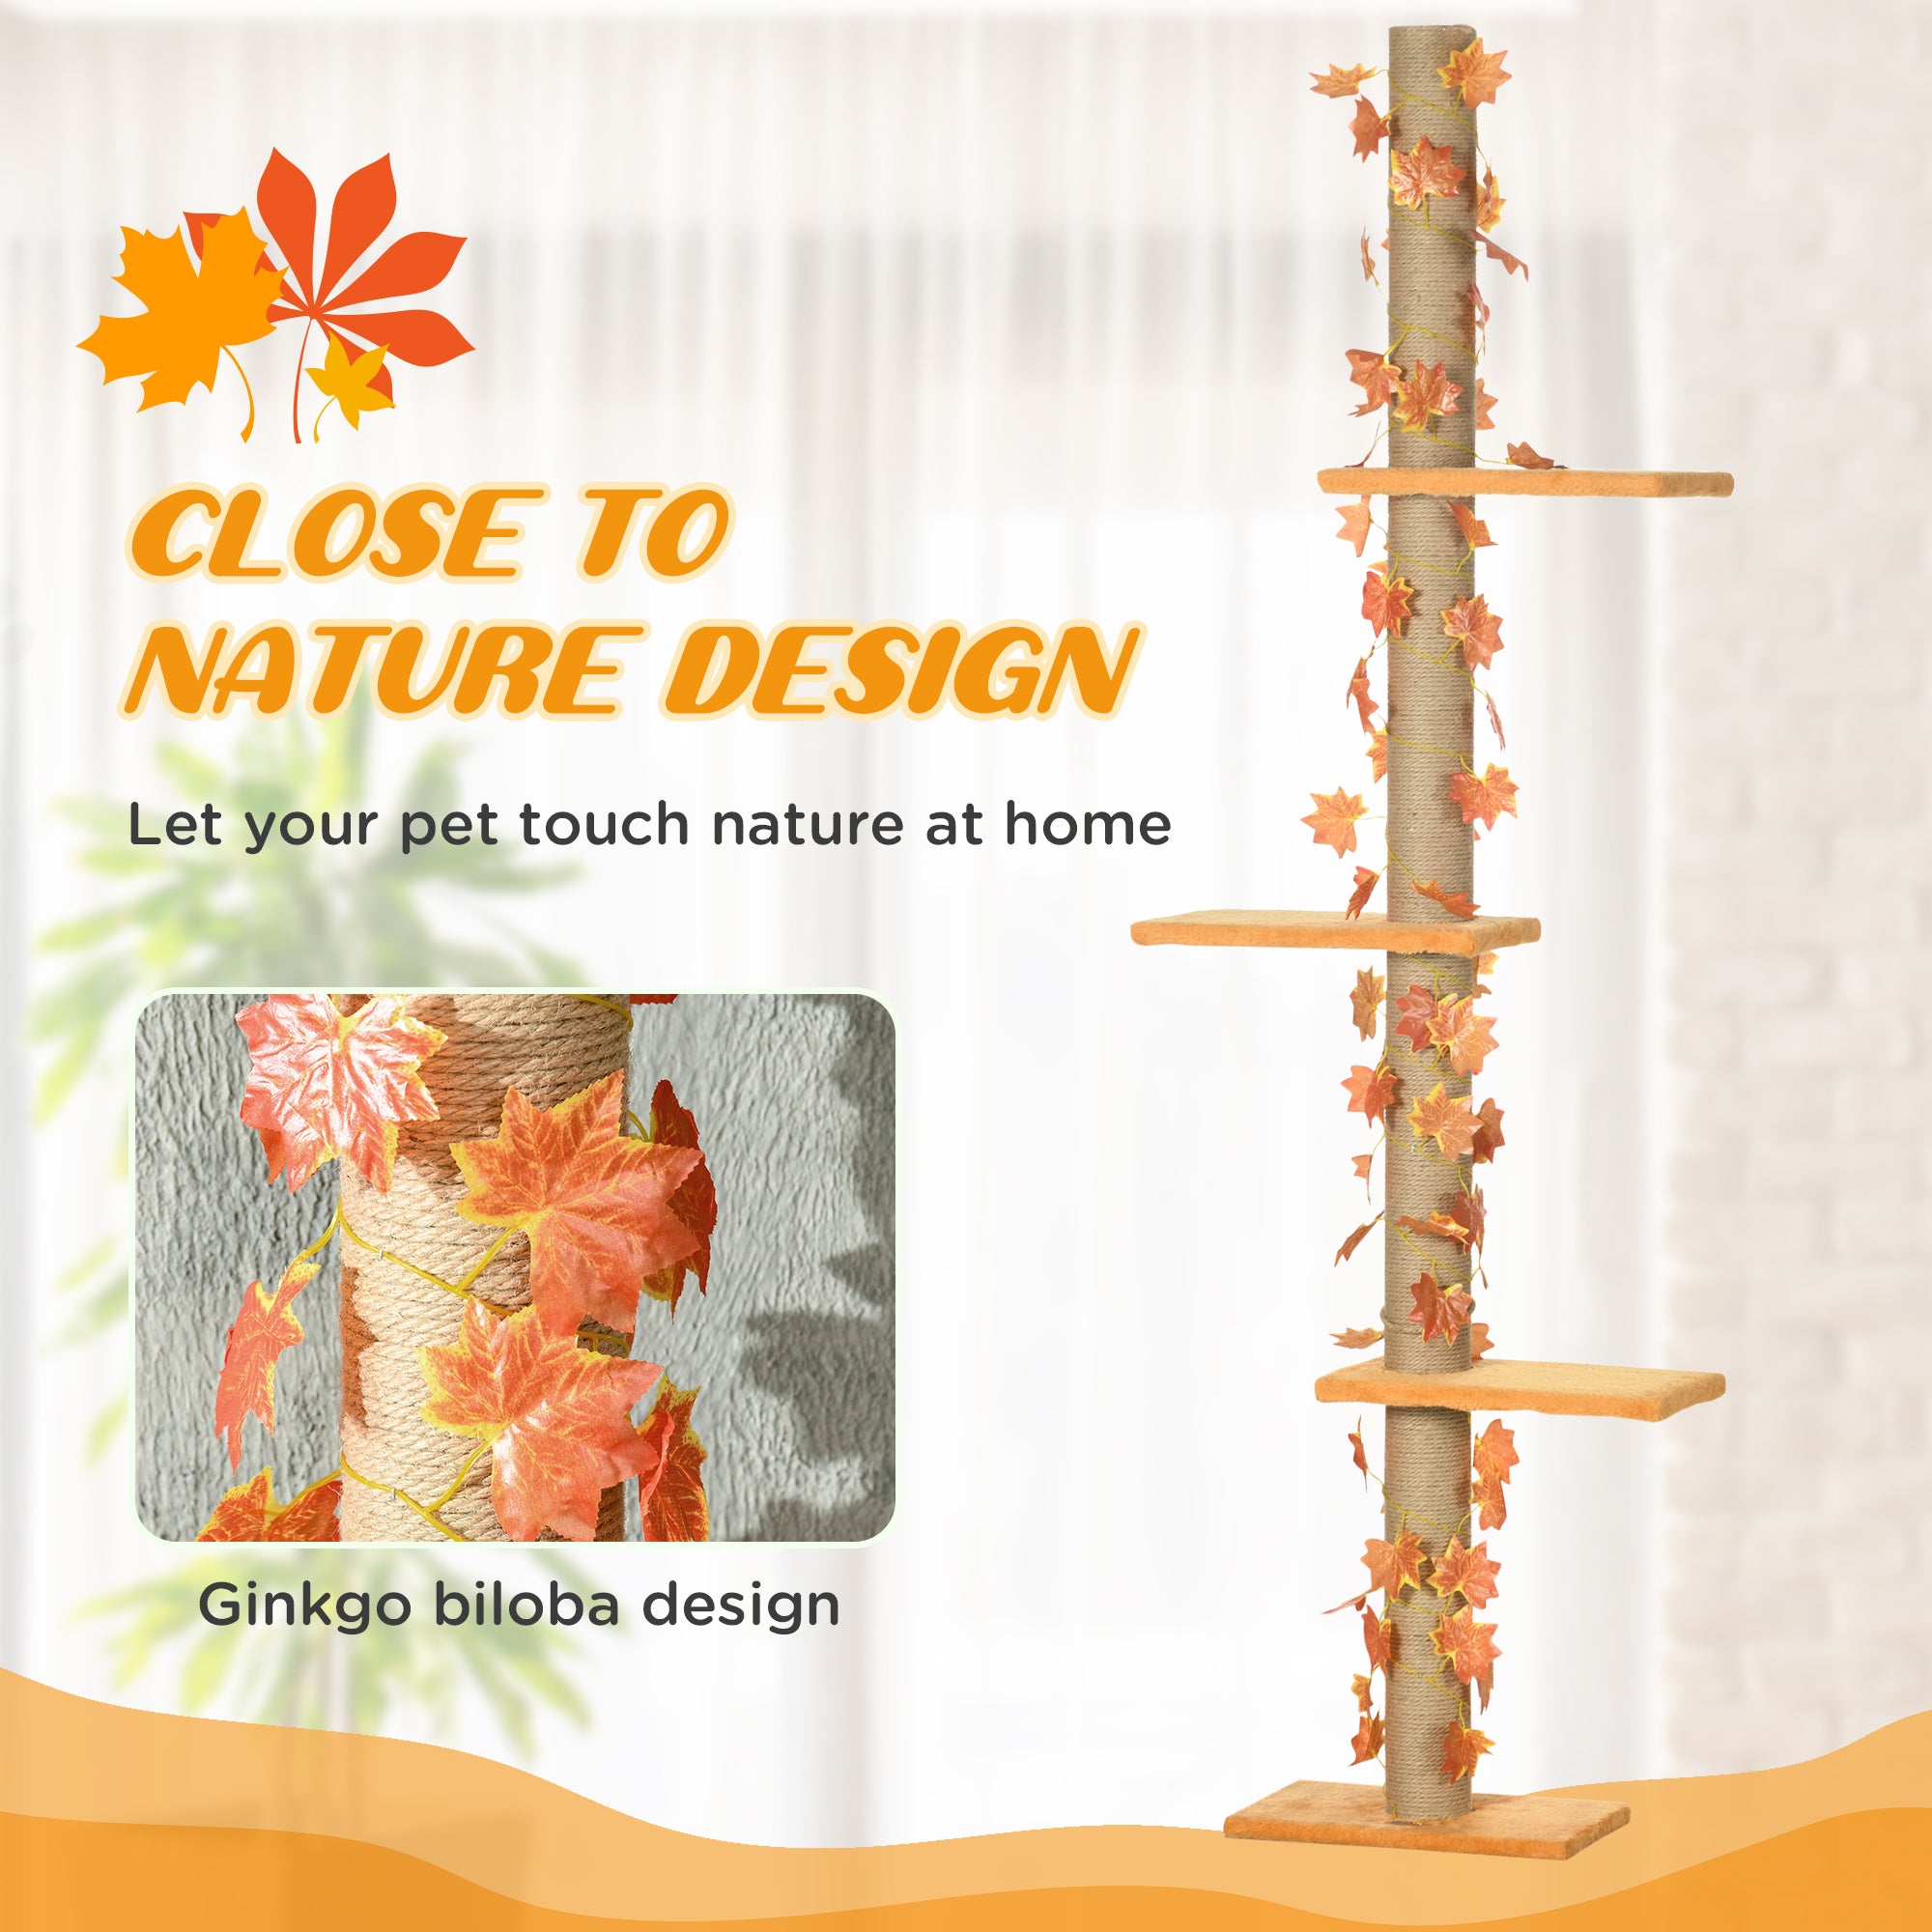 PawHut 202-242cm Height Adjustable Floor to Ceiling Cat Tree for Indoor Cats with Sisal Scratching Post, 3- Tier Cat Tower Climbing Activity Centre with Platforms, Leaves, Orange